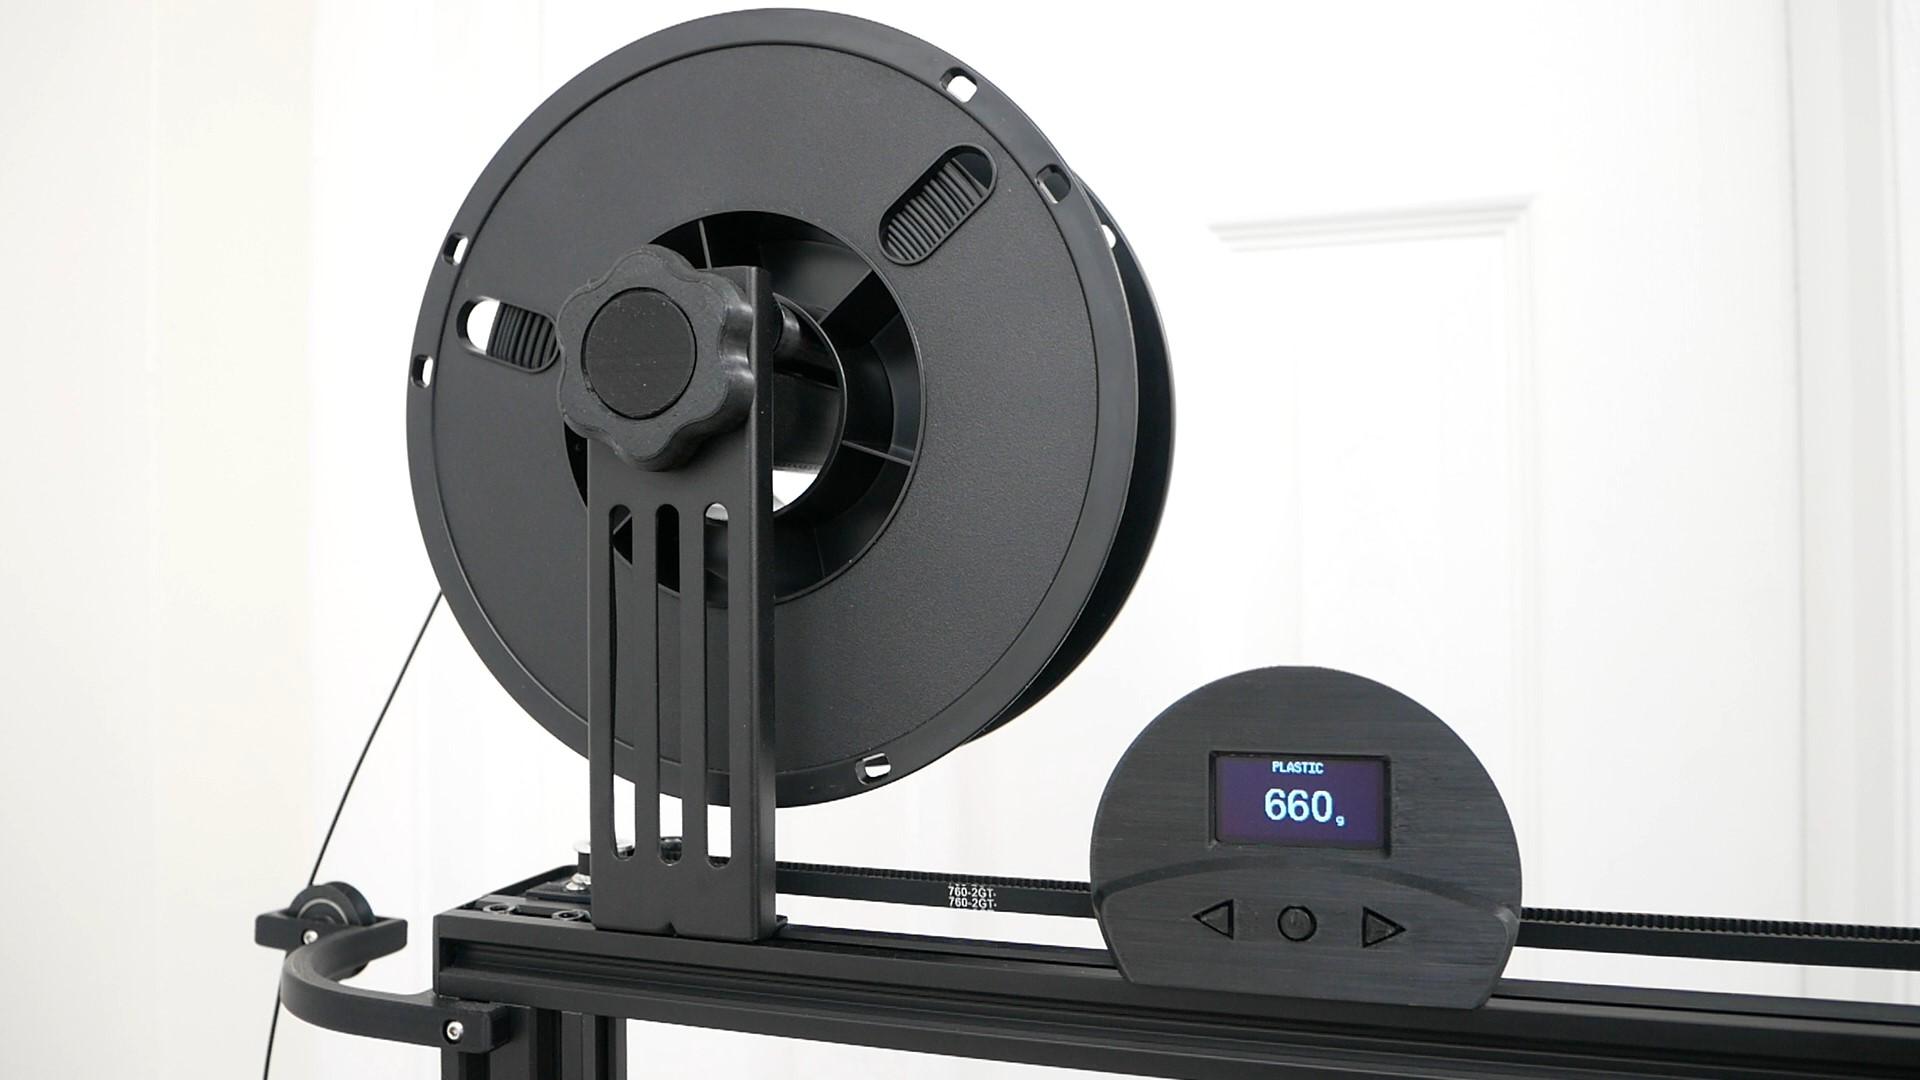 DIY digital spool scale tells you how much filament is left